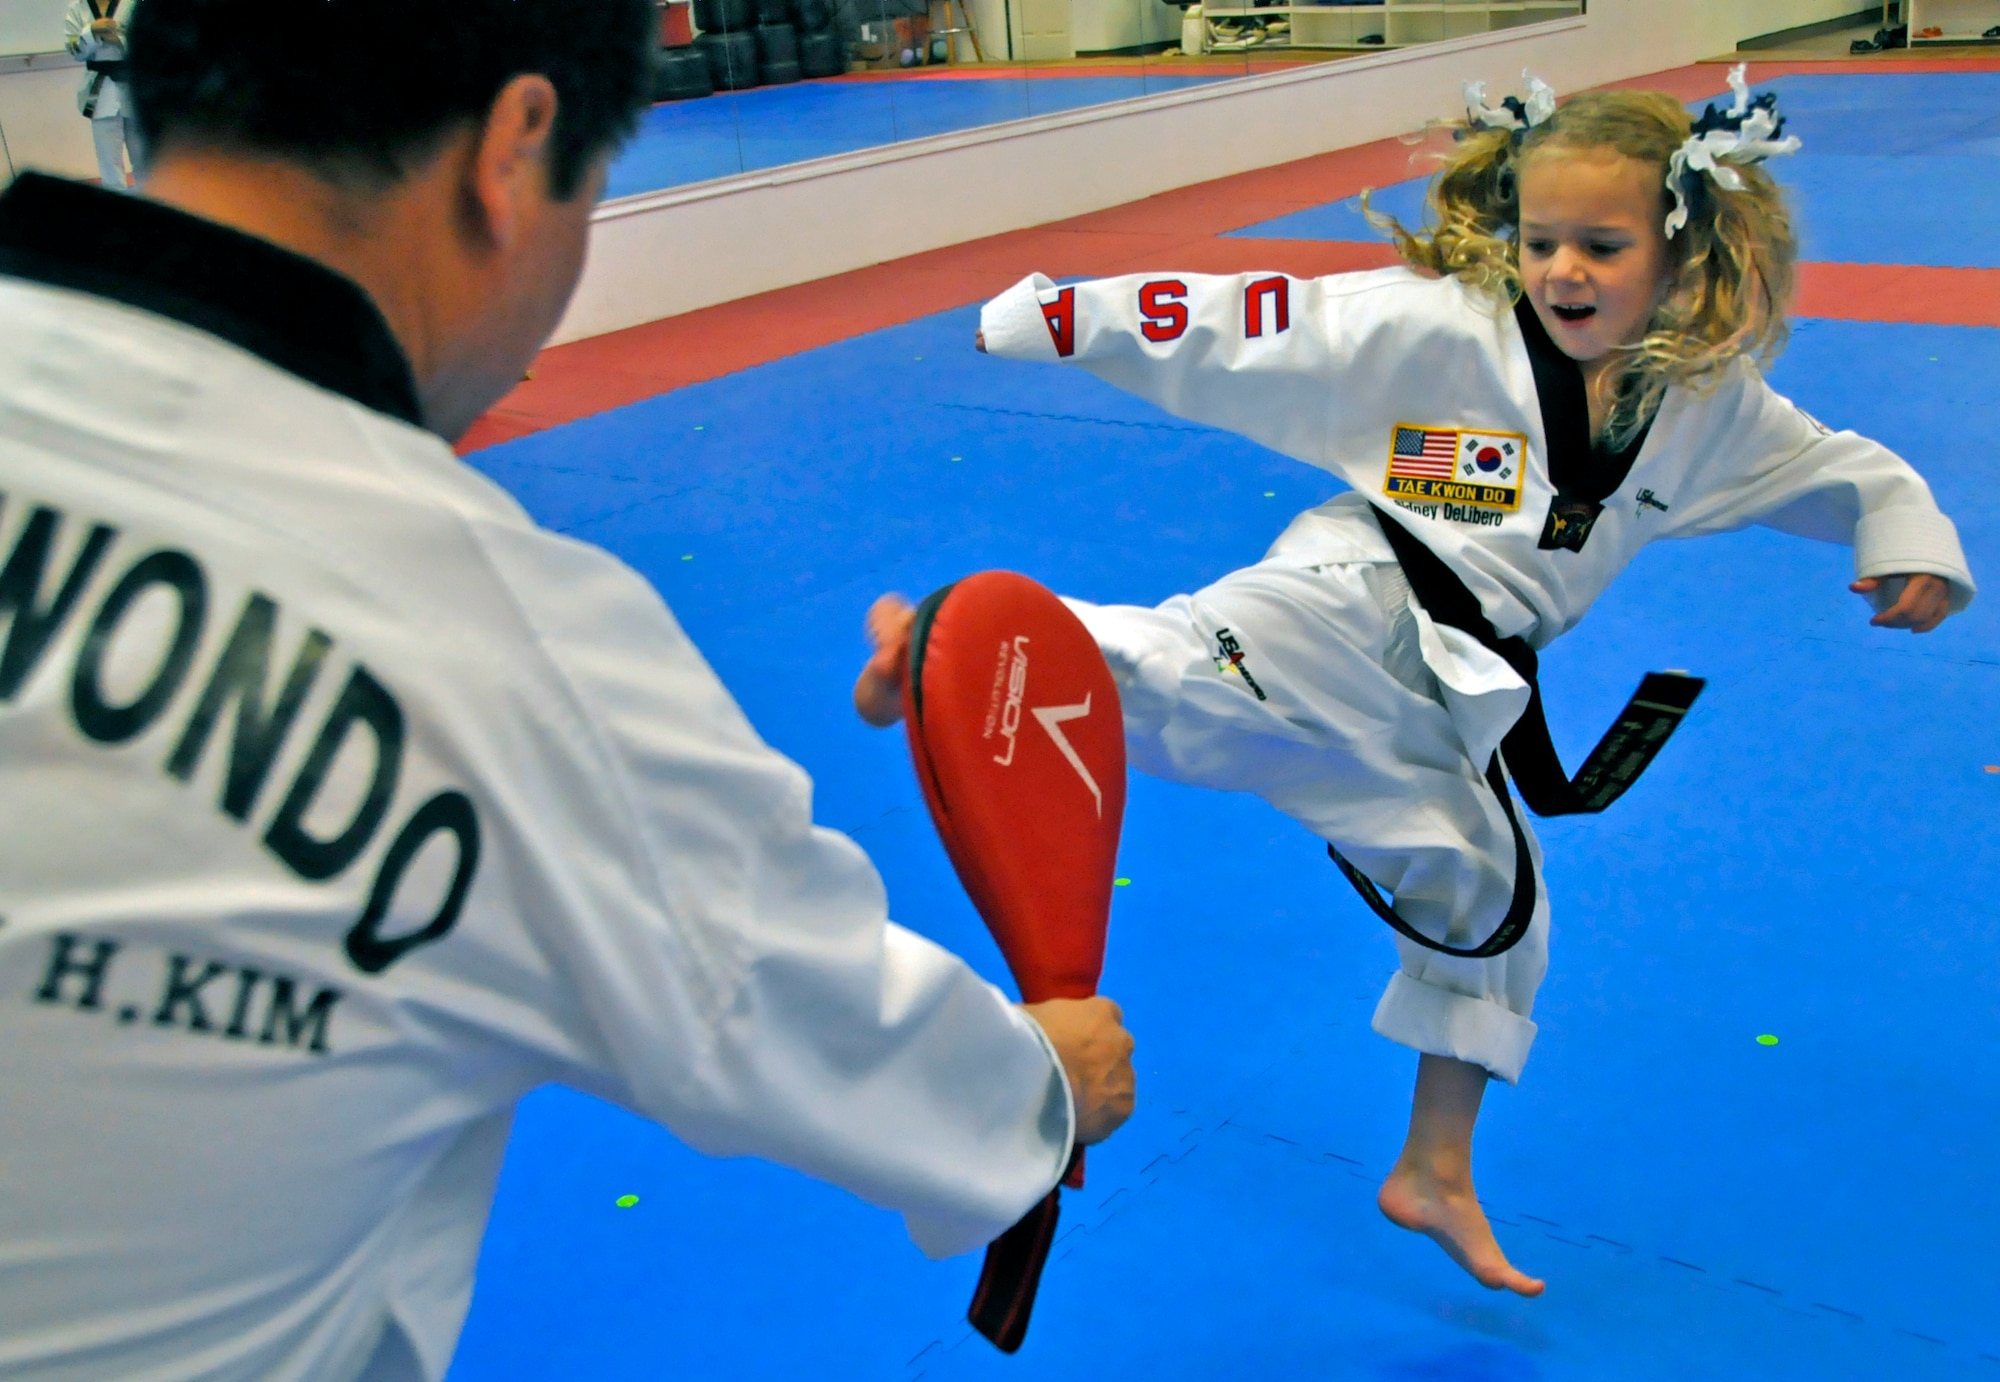 Sidney DeLibero, daughter of a 446th Airlift Wing Reservist, practices her kick at a taekwondo school in Edgewood, Wash., Oct. 17. DiLibero became the world's youngest taekwondo black belt at 6 years old Sept. 20, according to the World Taekwondo Headquarters in South Korea. (U.S. Air Force Photo/Staff Sgt. Rachael Garneau)